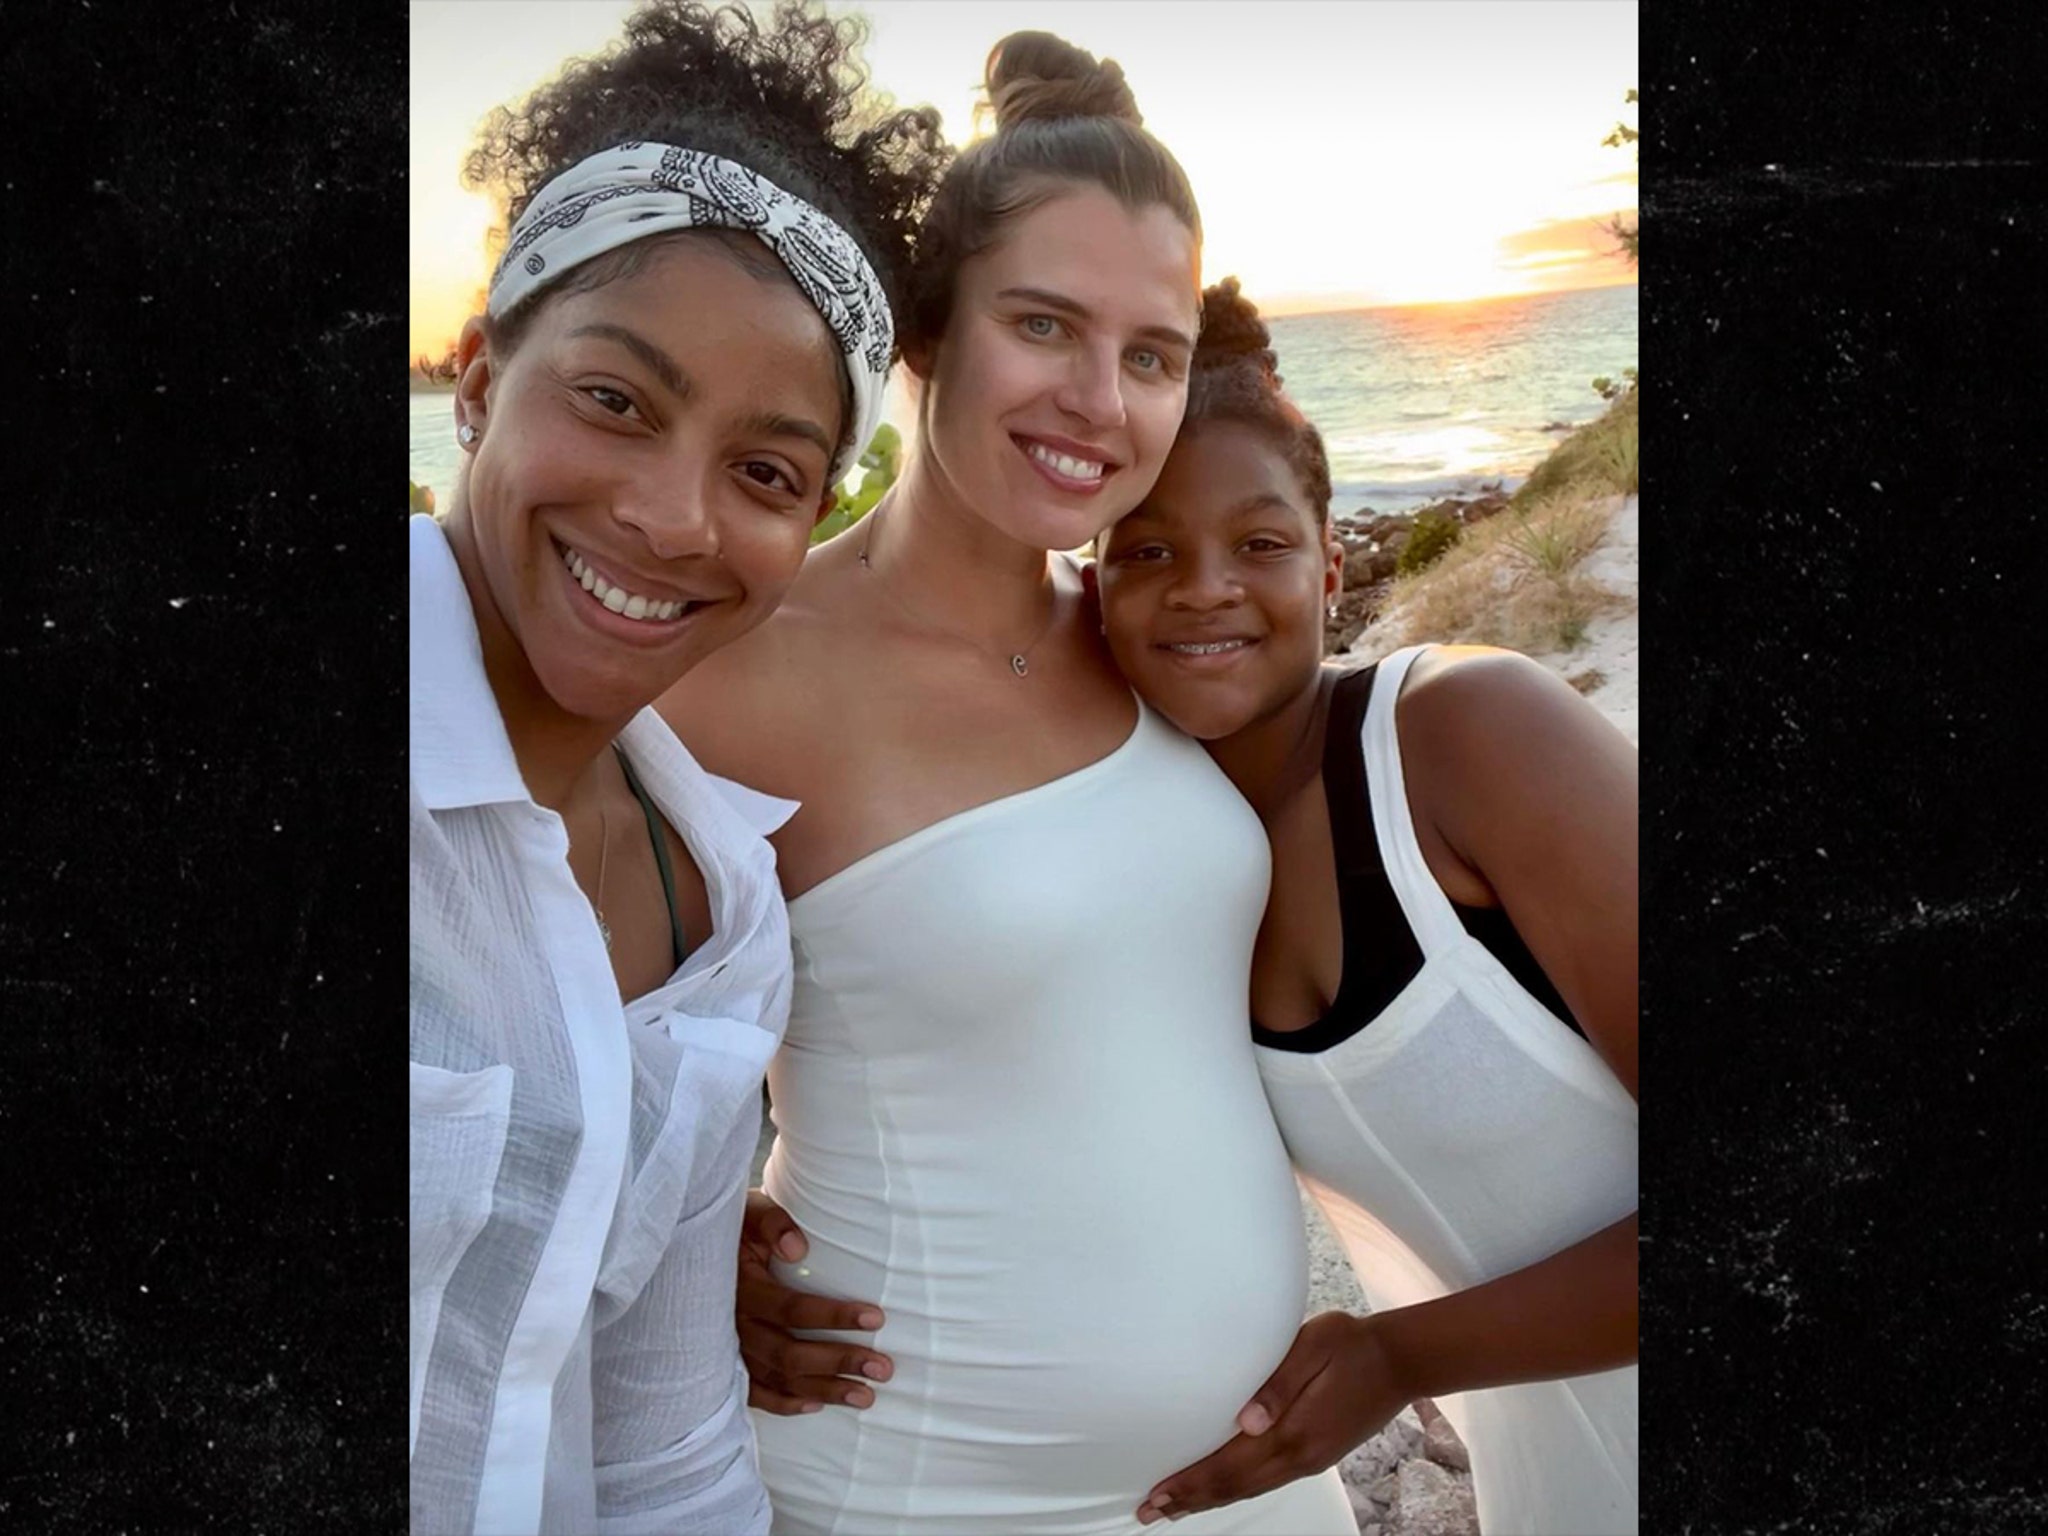 Candace Parker Reveals Her Wife Is Pregnant, 'It's Surreal!